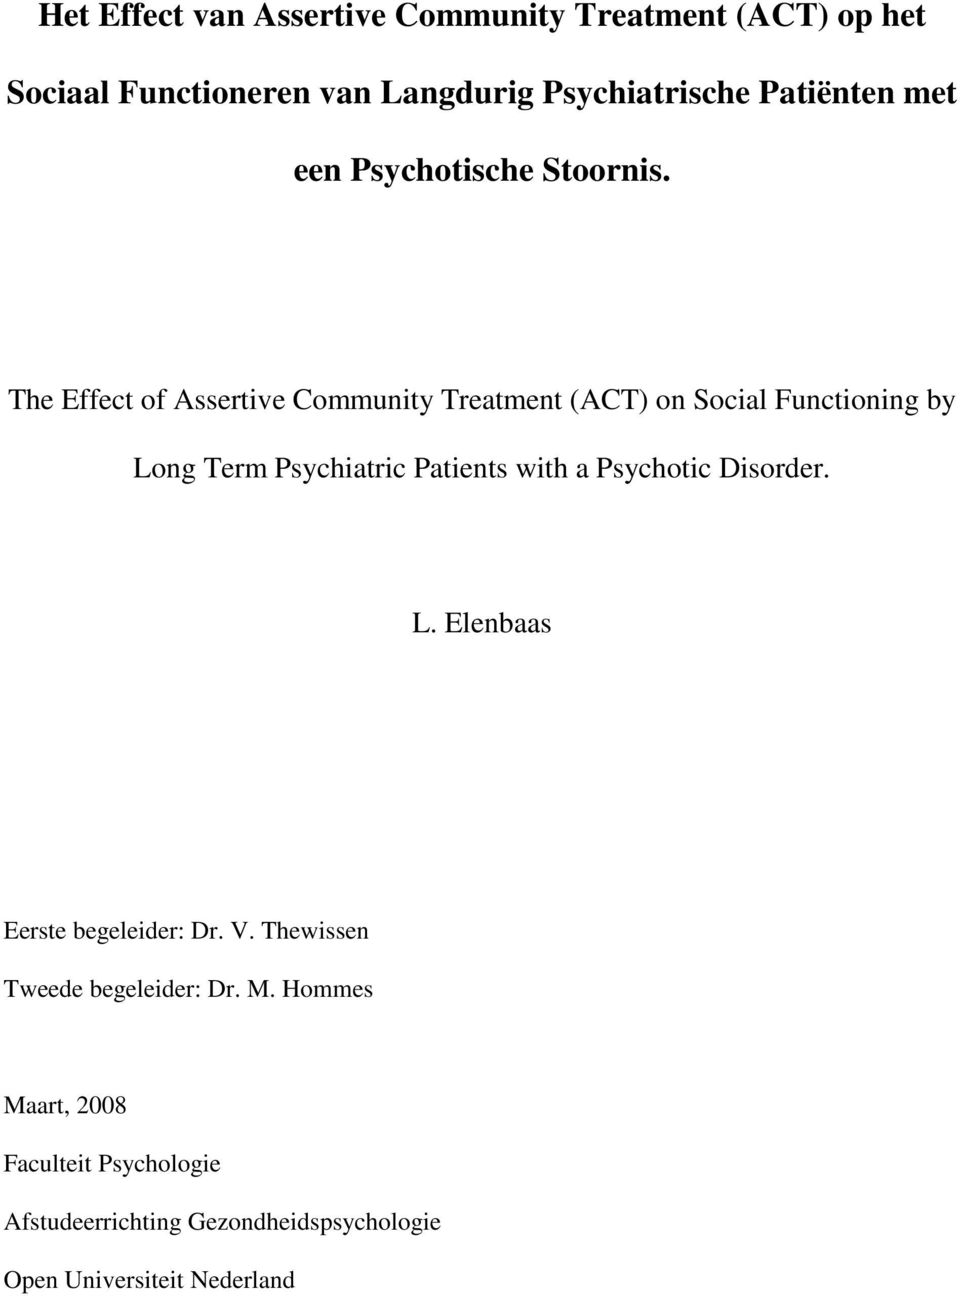 The Effect of Assertive Community Treatment (ACT) on Social Functioning by Long Term Psychiatric Patients with a